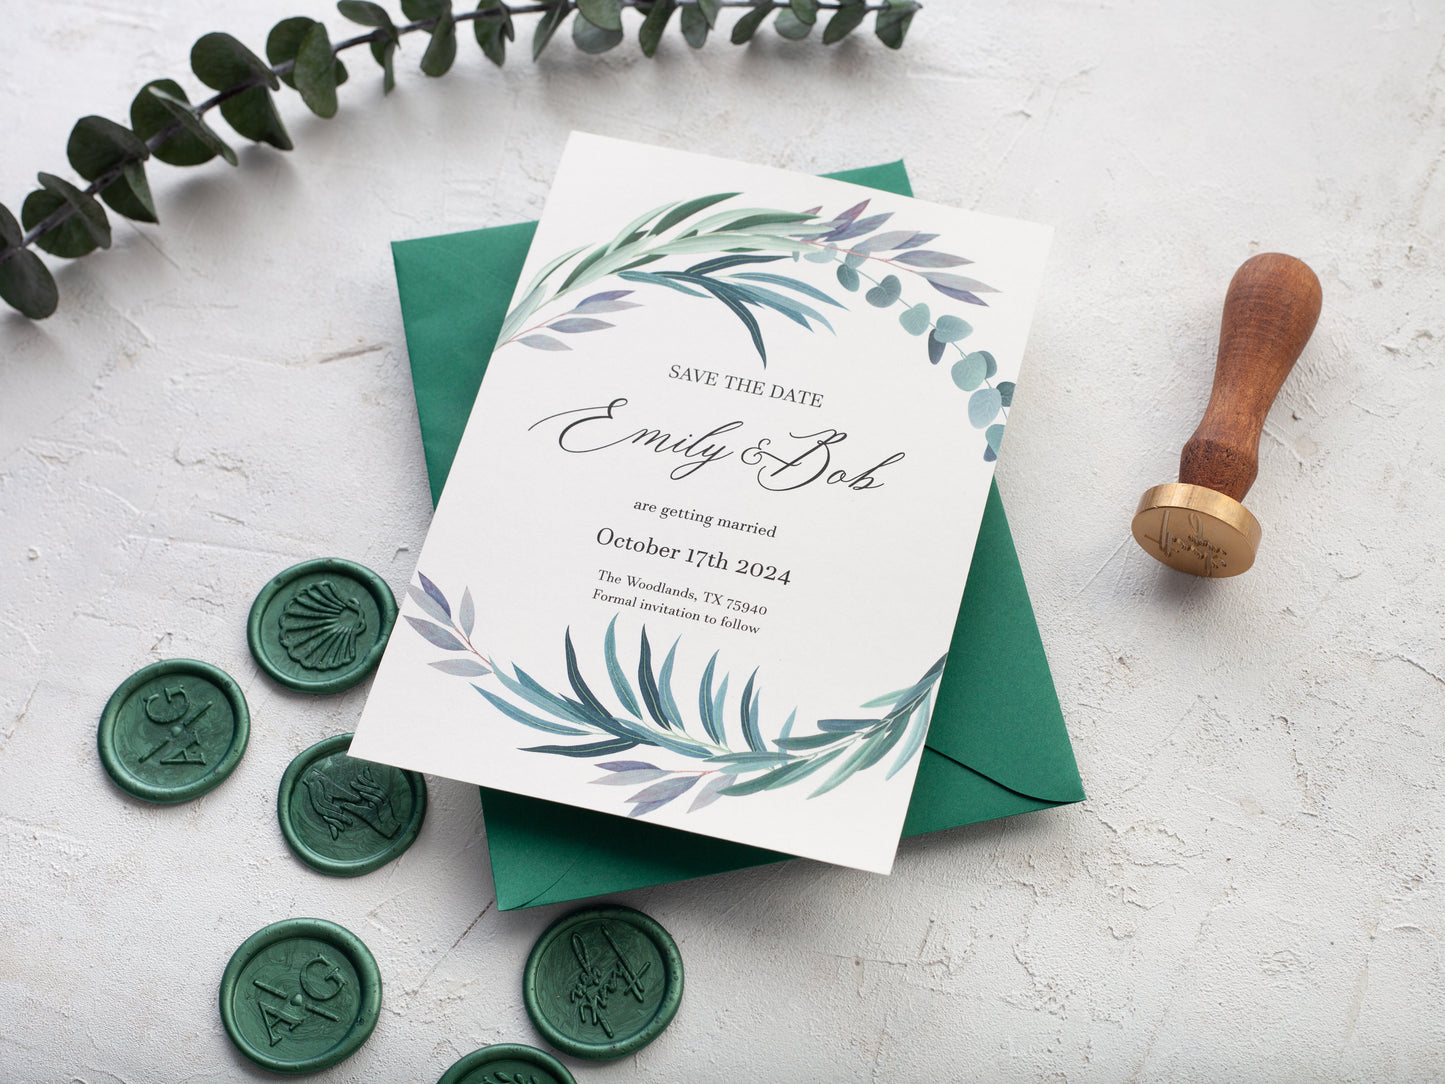 Floral Save the Date Card with Magnet, Greenery Wedding Announcement with Envelope